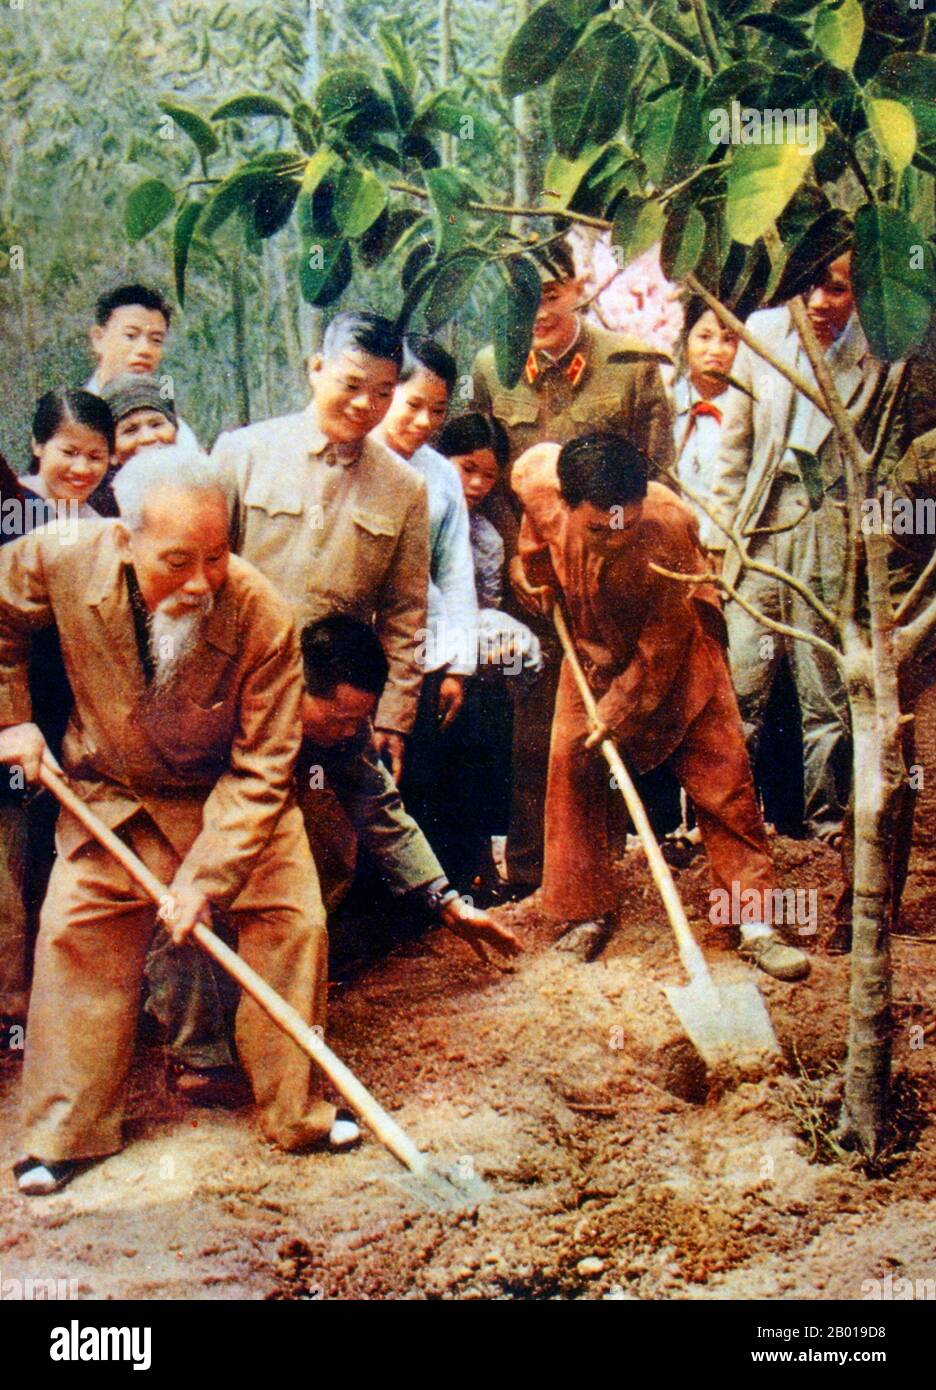 Vietnam: President Ho Chi Minh (19 May 1890 - 3 September 1969) planting trees during the Tet holidays in Bat Bat, c. 1969.  Hồ Chí Minh, born Nguyễn Sinh Cung and also known as Nguyễn Ái Quốc was a Vietnamese Communist revolutionary leader who was prime minister (1946-1955) and president (1945-1969) of the Democratic Republic of Vietnam (North Vietnam). He formed the Democratic Republic of Vietnam and led the Viet Cong during the Vietnam War until his death. Stock Photo